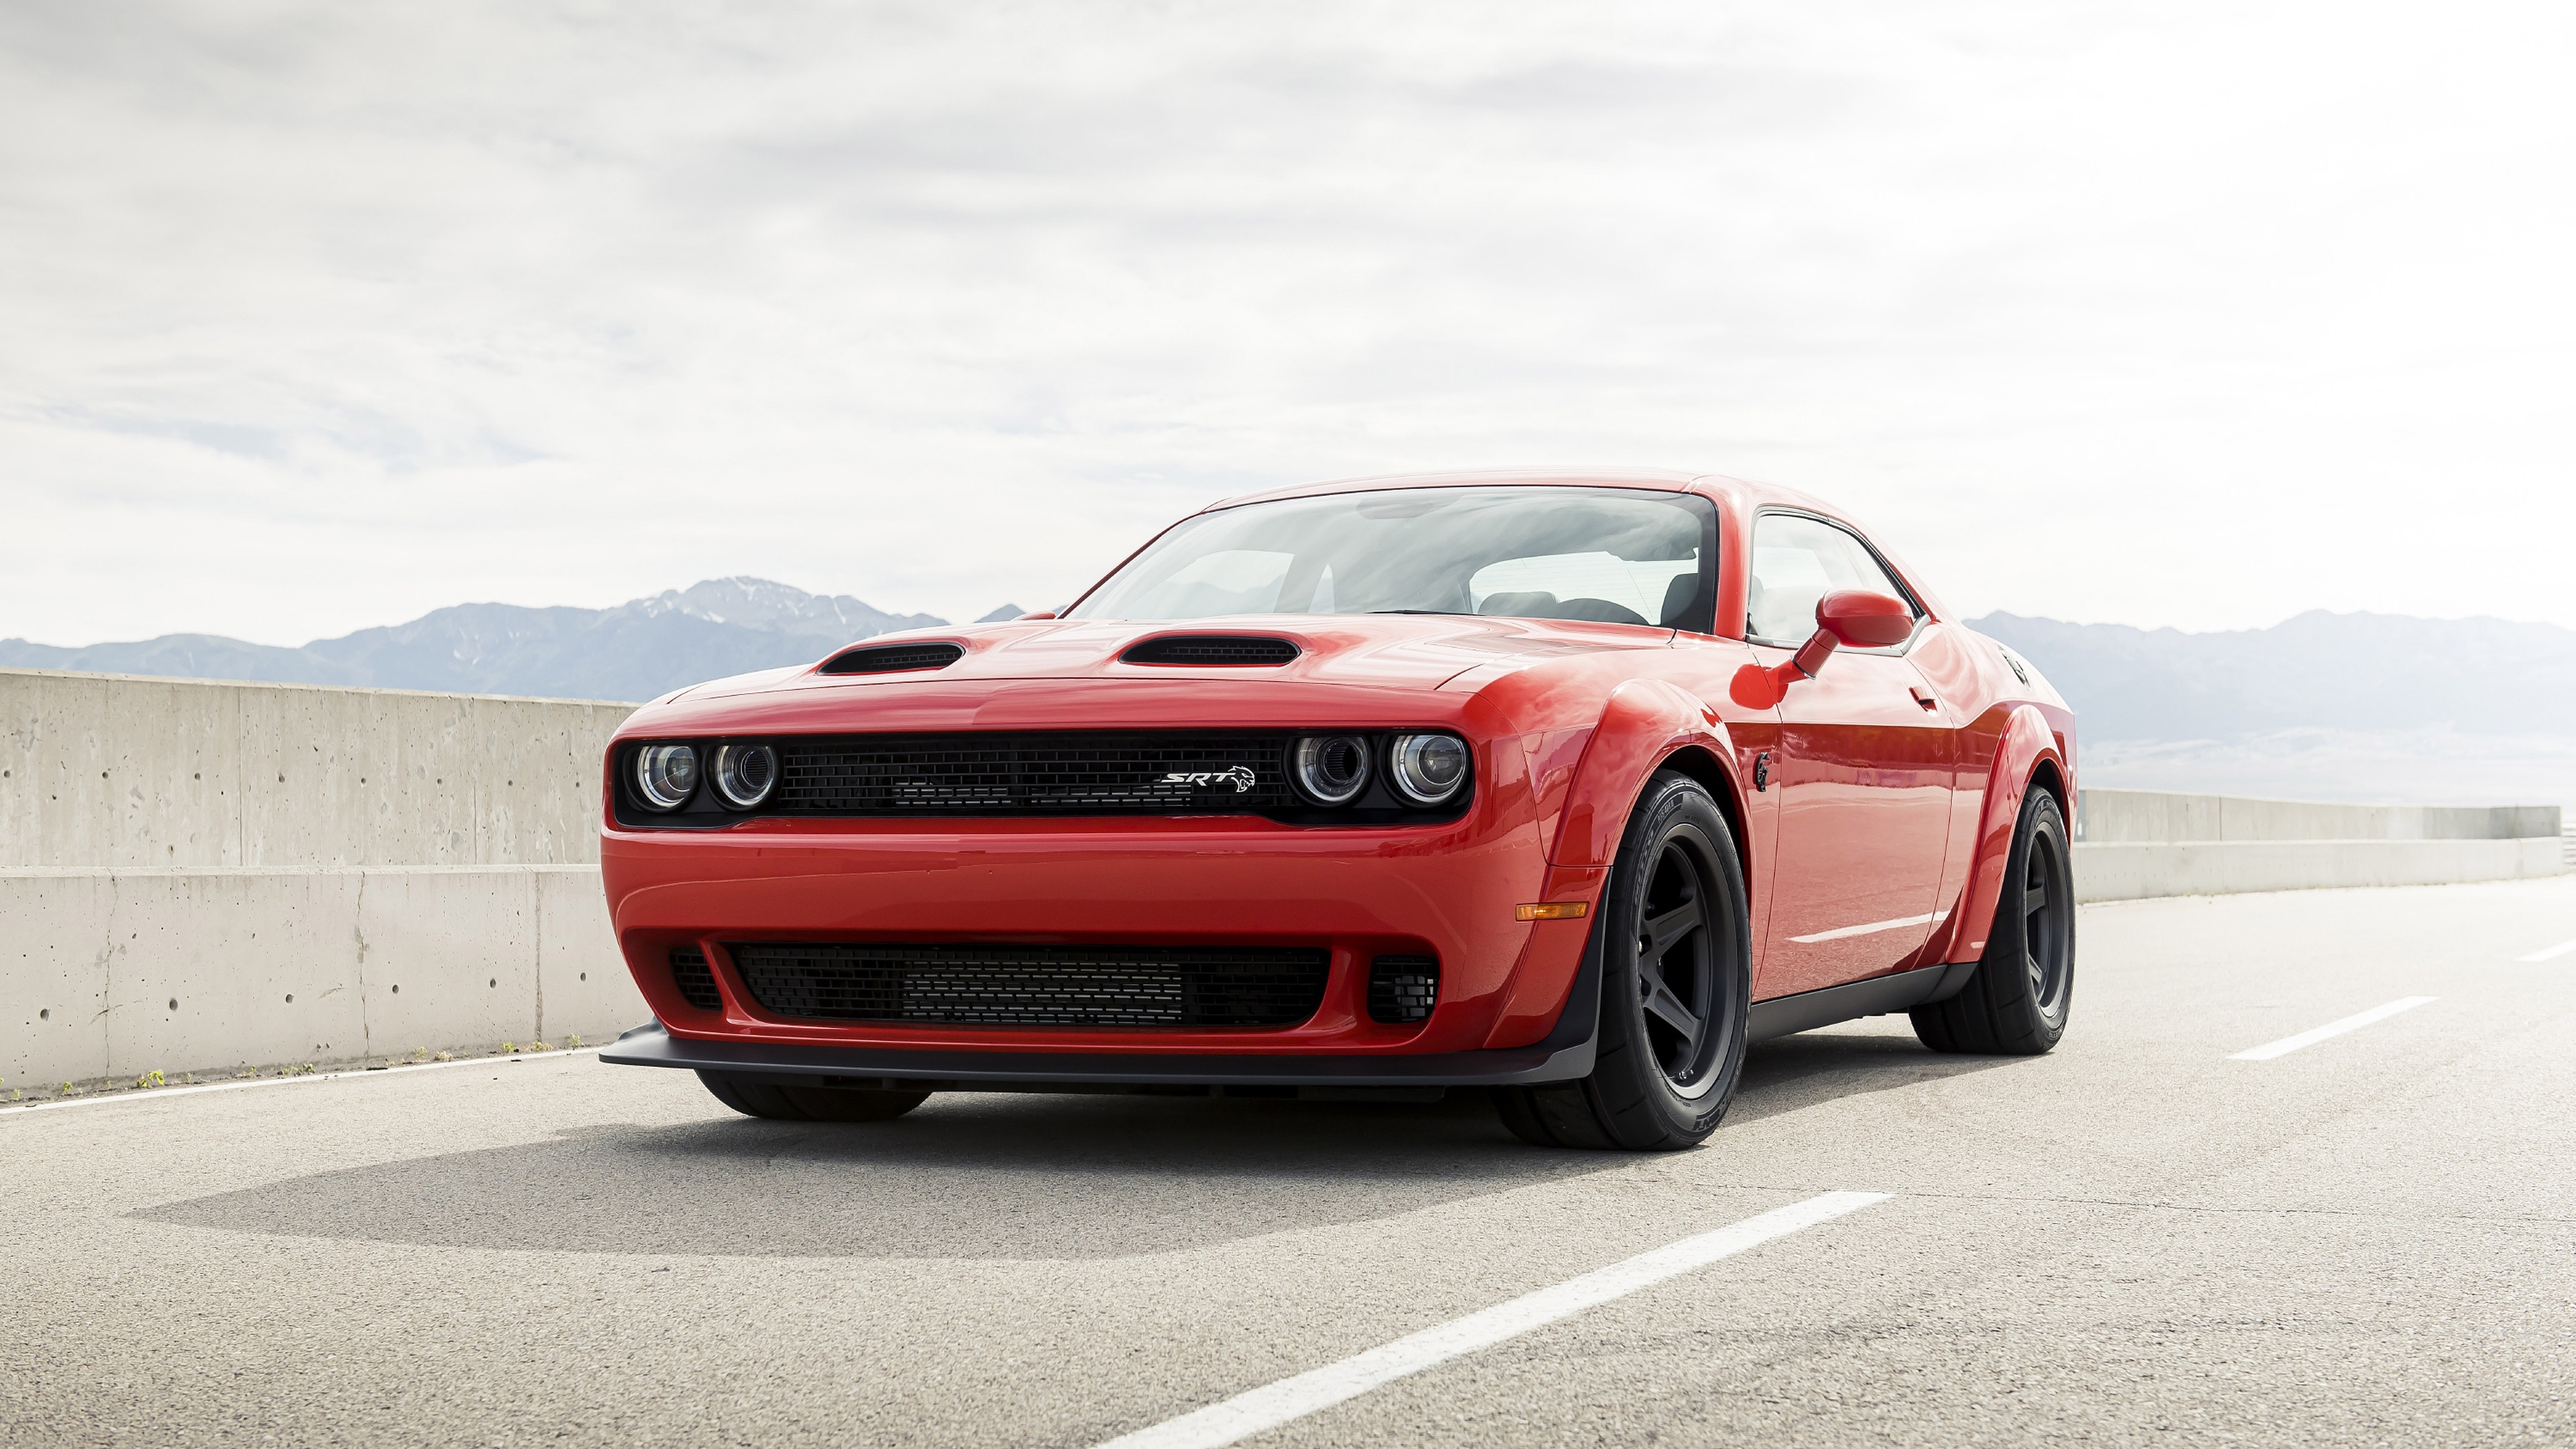 Dodge Challenger 4k, Bold and powerful, Muscle car heritage, Aggressive styling, 3840x2160 4K Desktop